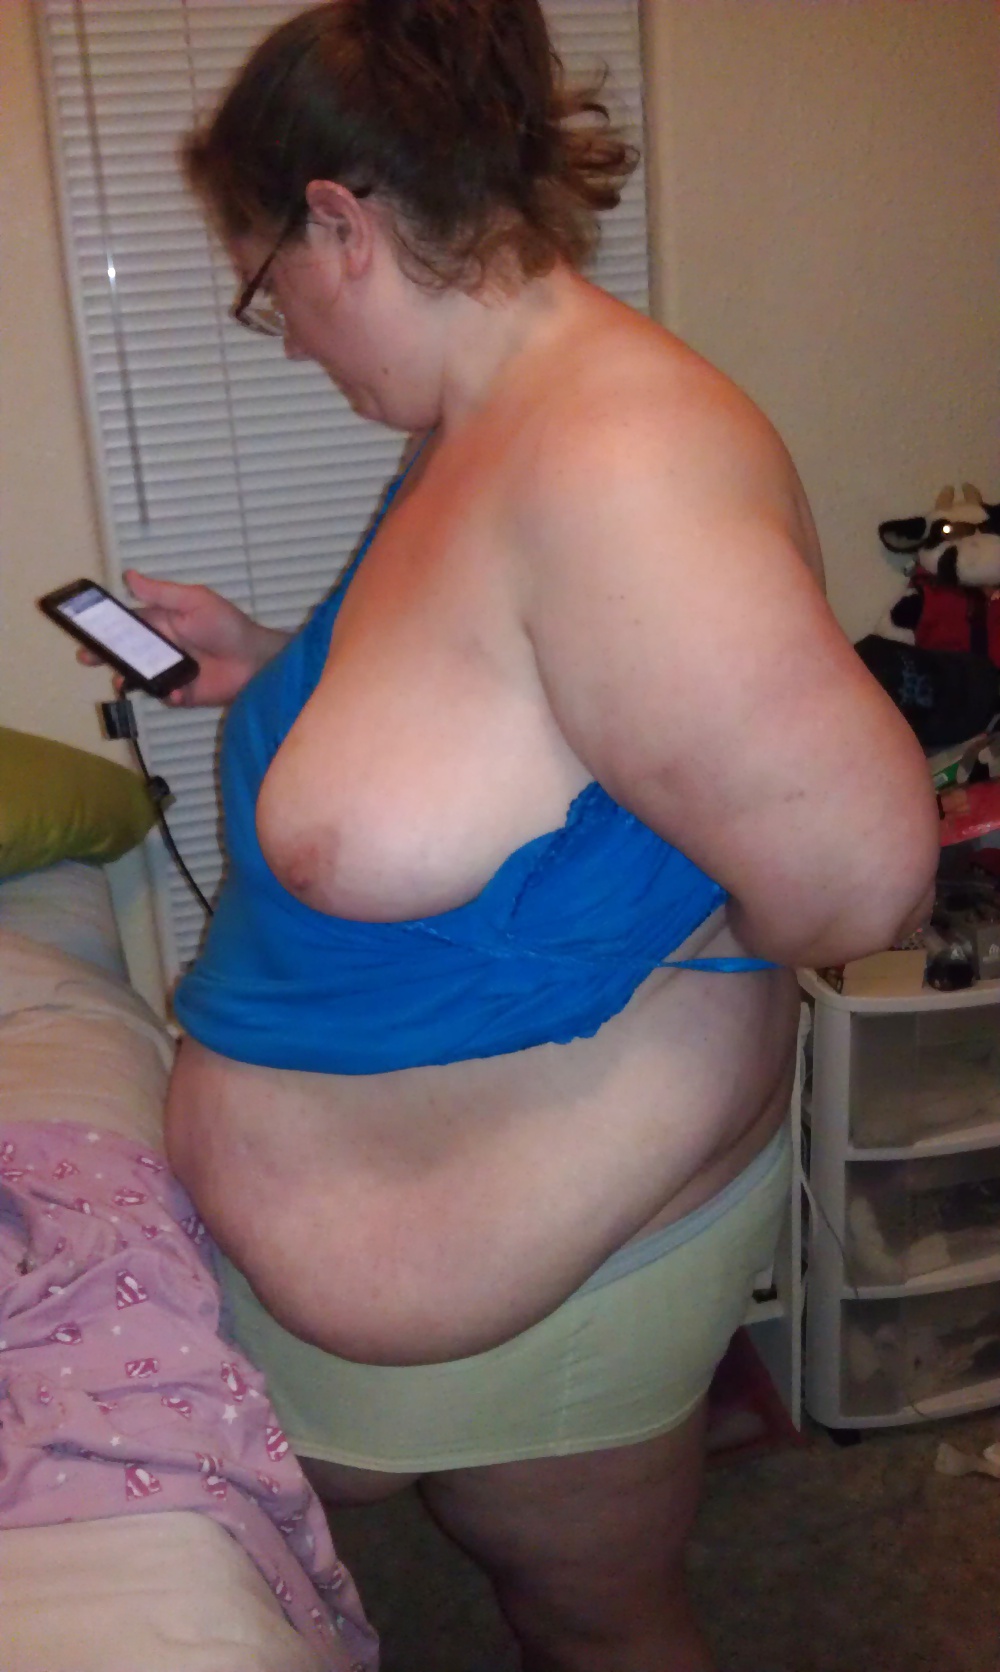 Comment For More Of Our BBW Fat Lesbian #39166517